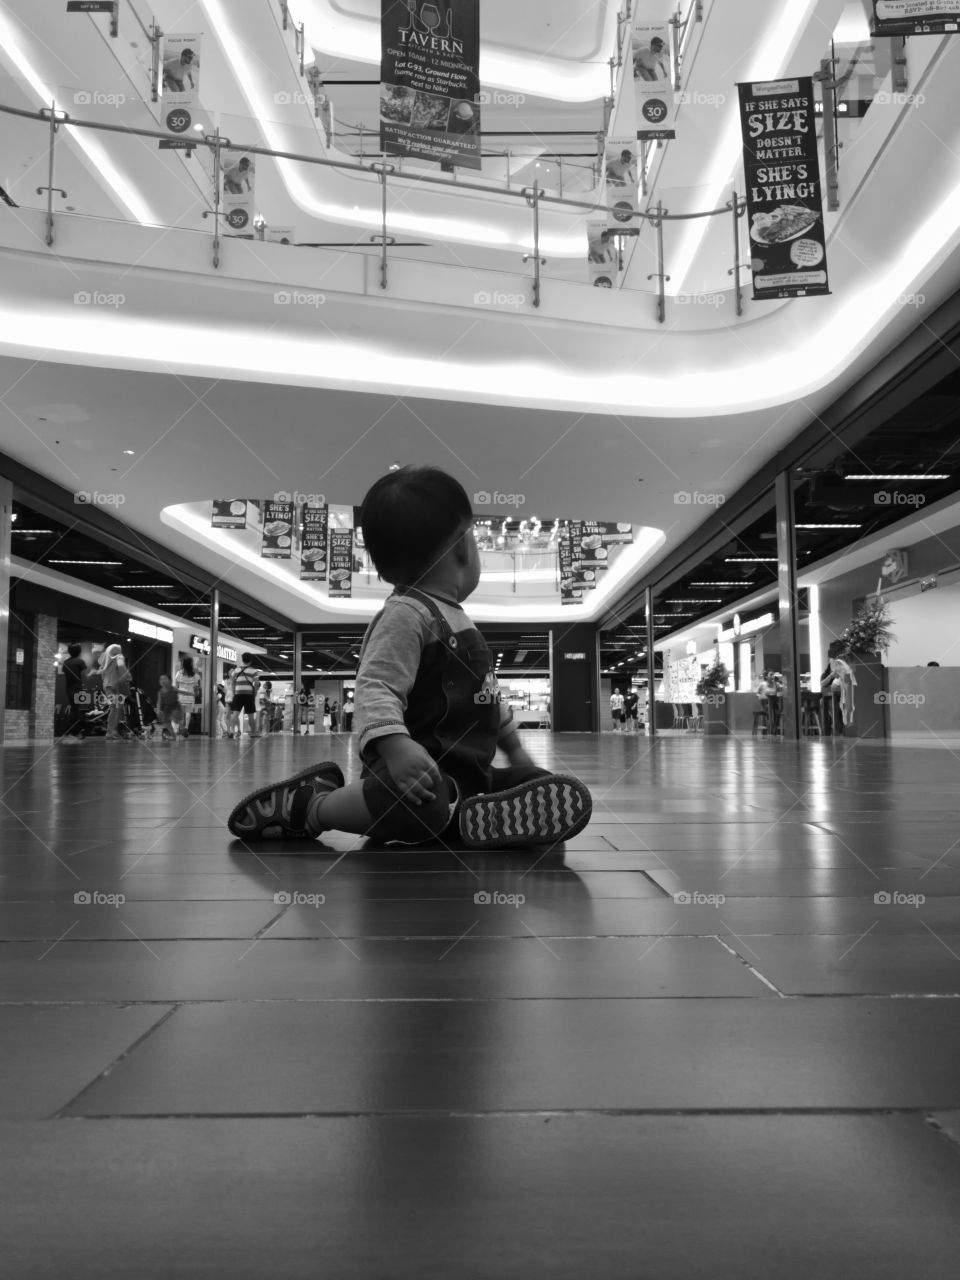 My son sat on the floor of a shopping mall while turning his head to look behind him